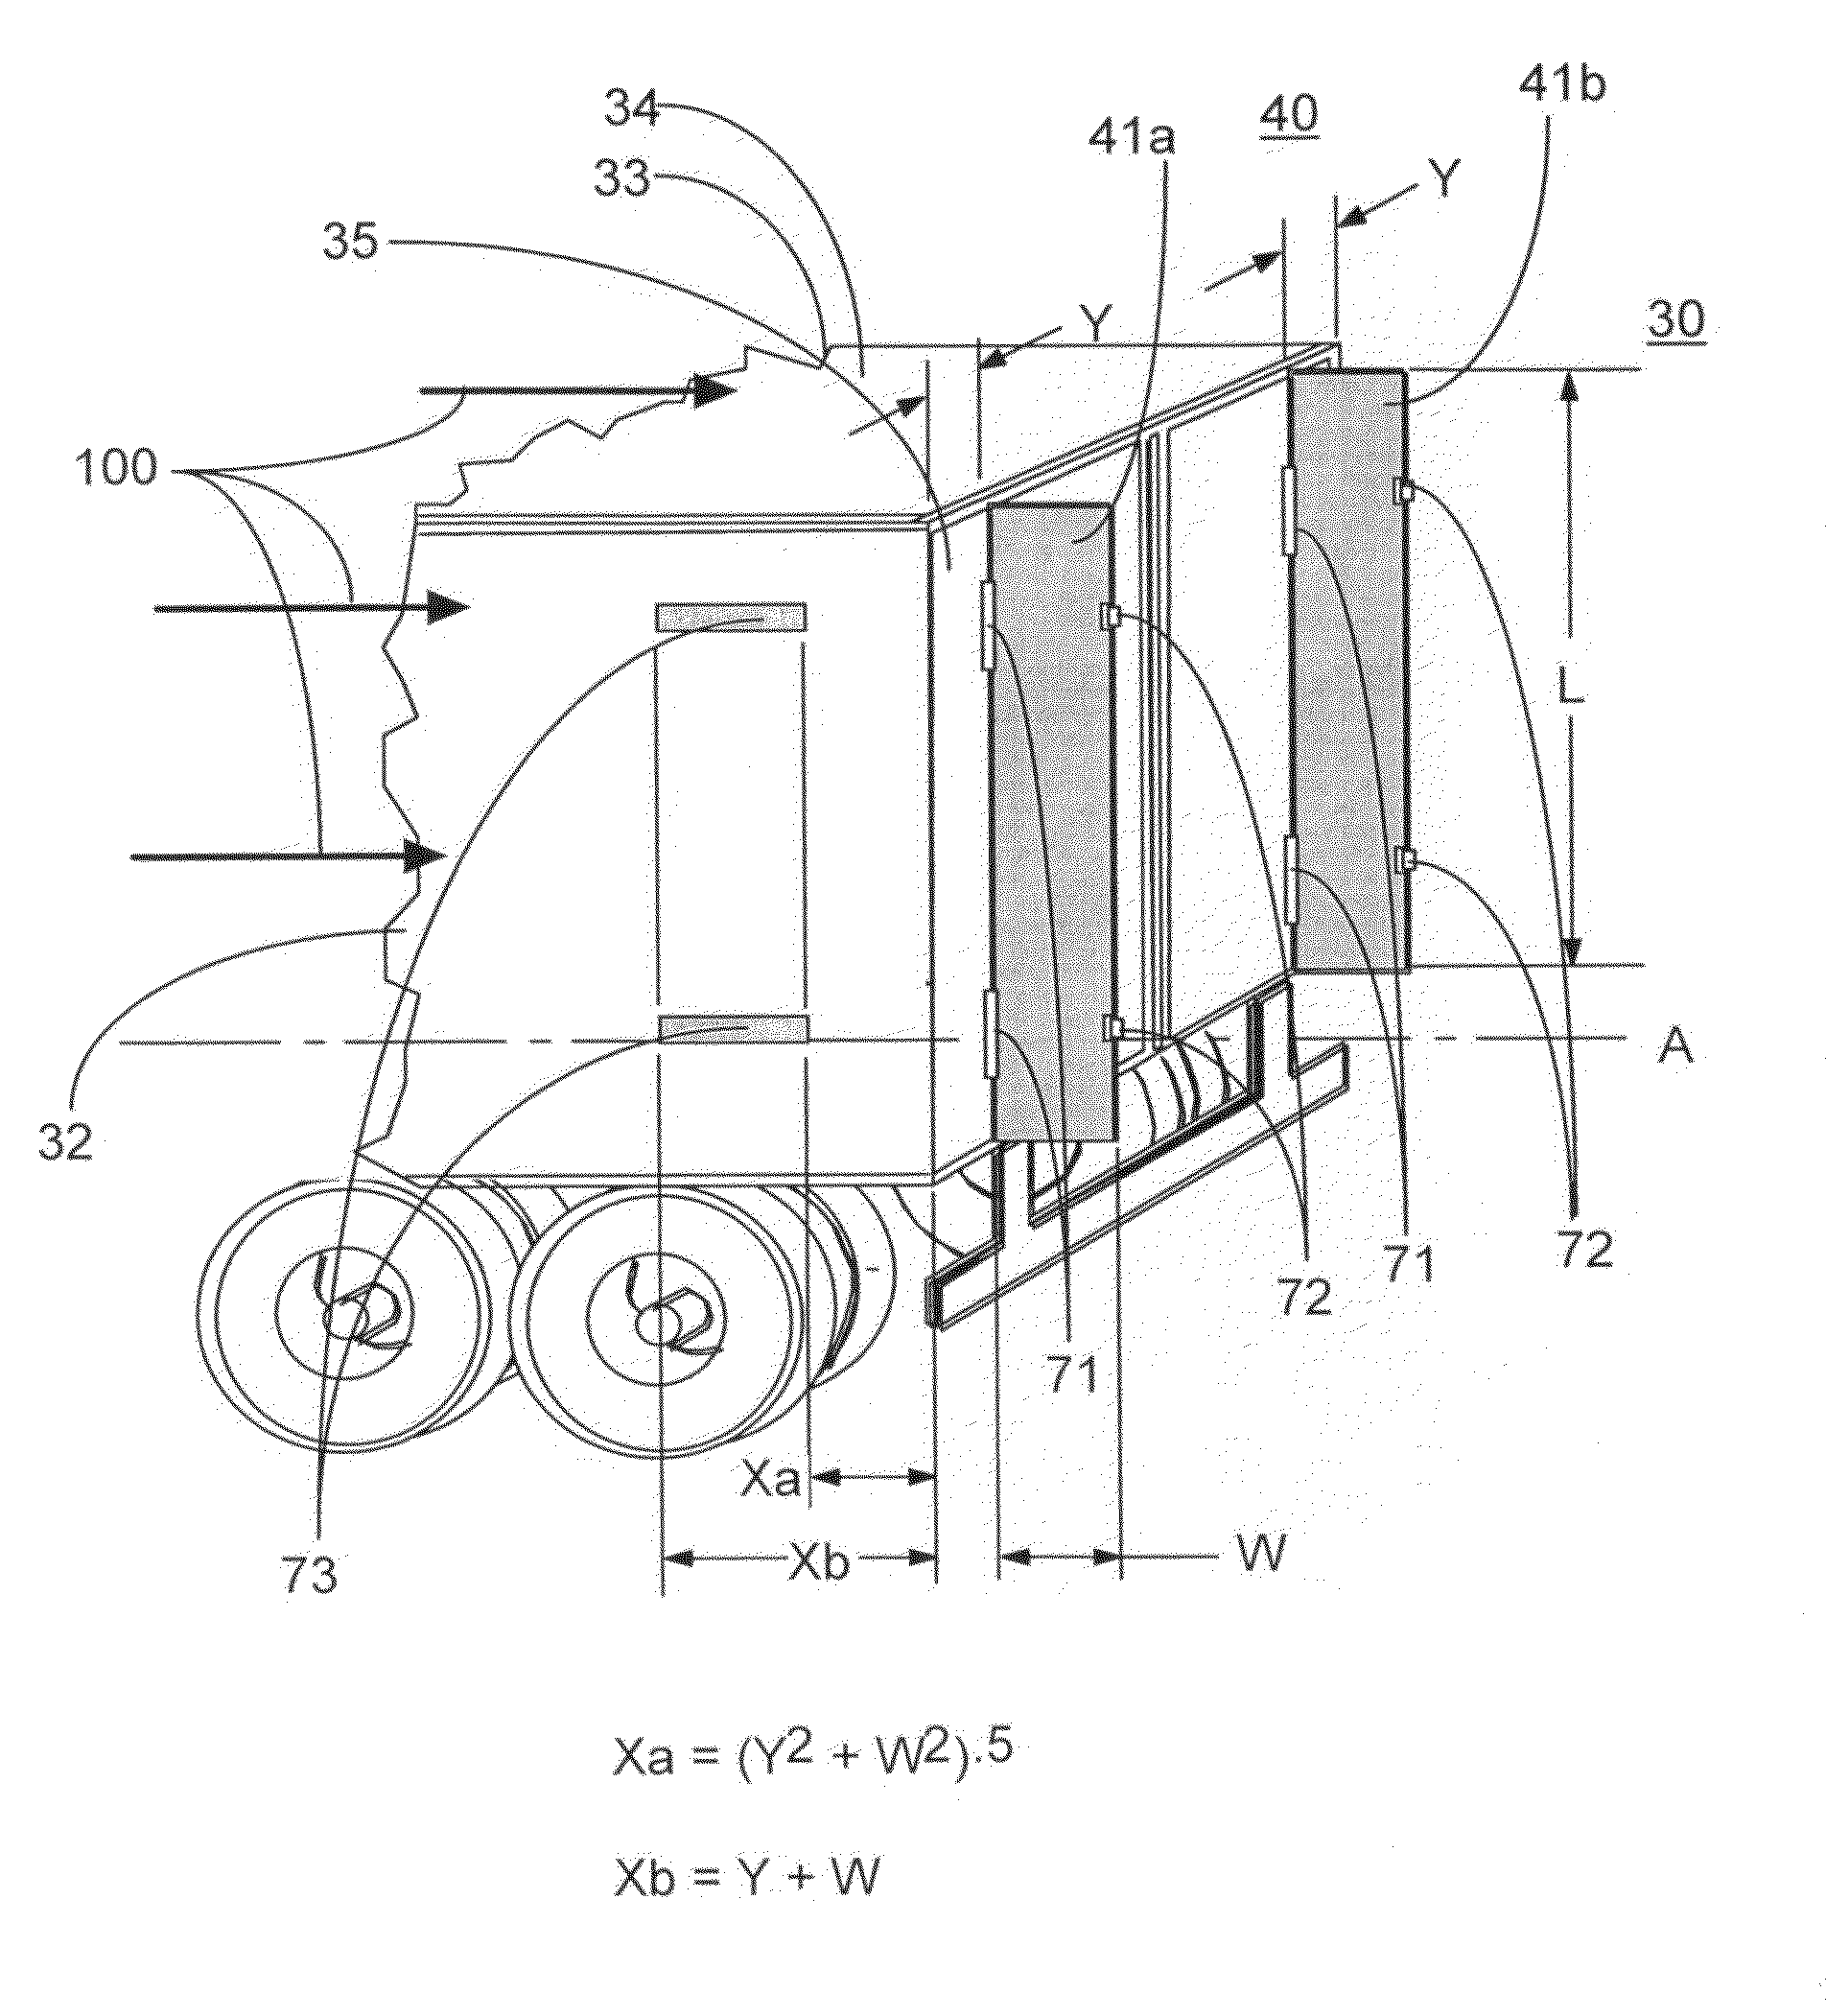 Wake stabilization device and method for reducing the aerodynamic drag of ground vehicles